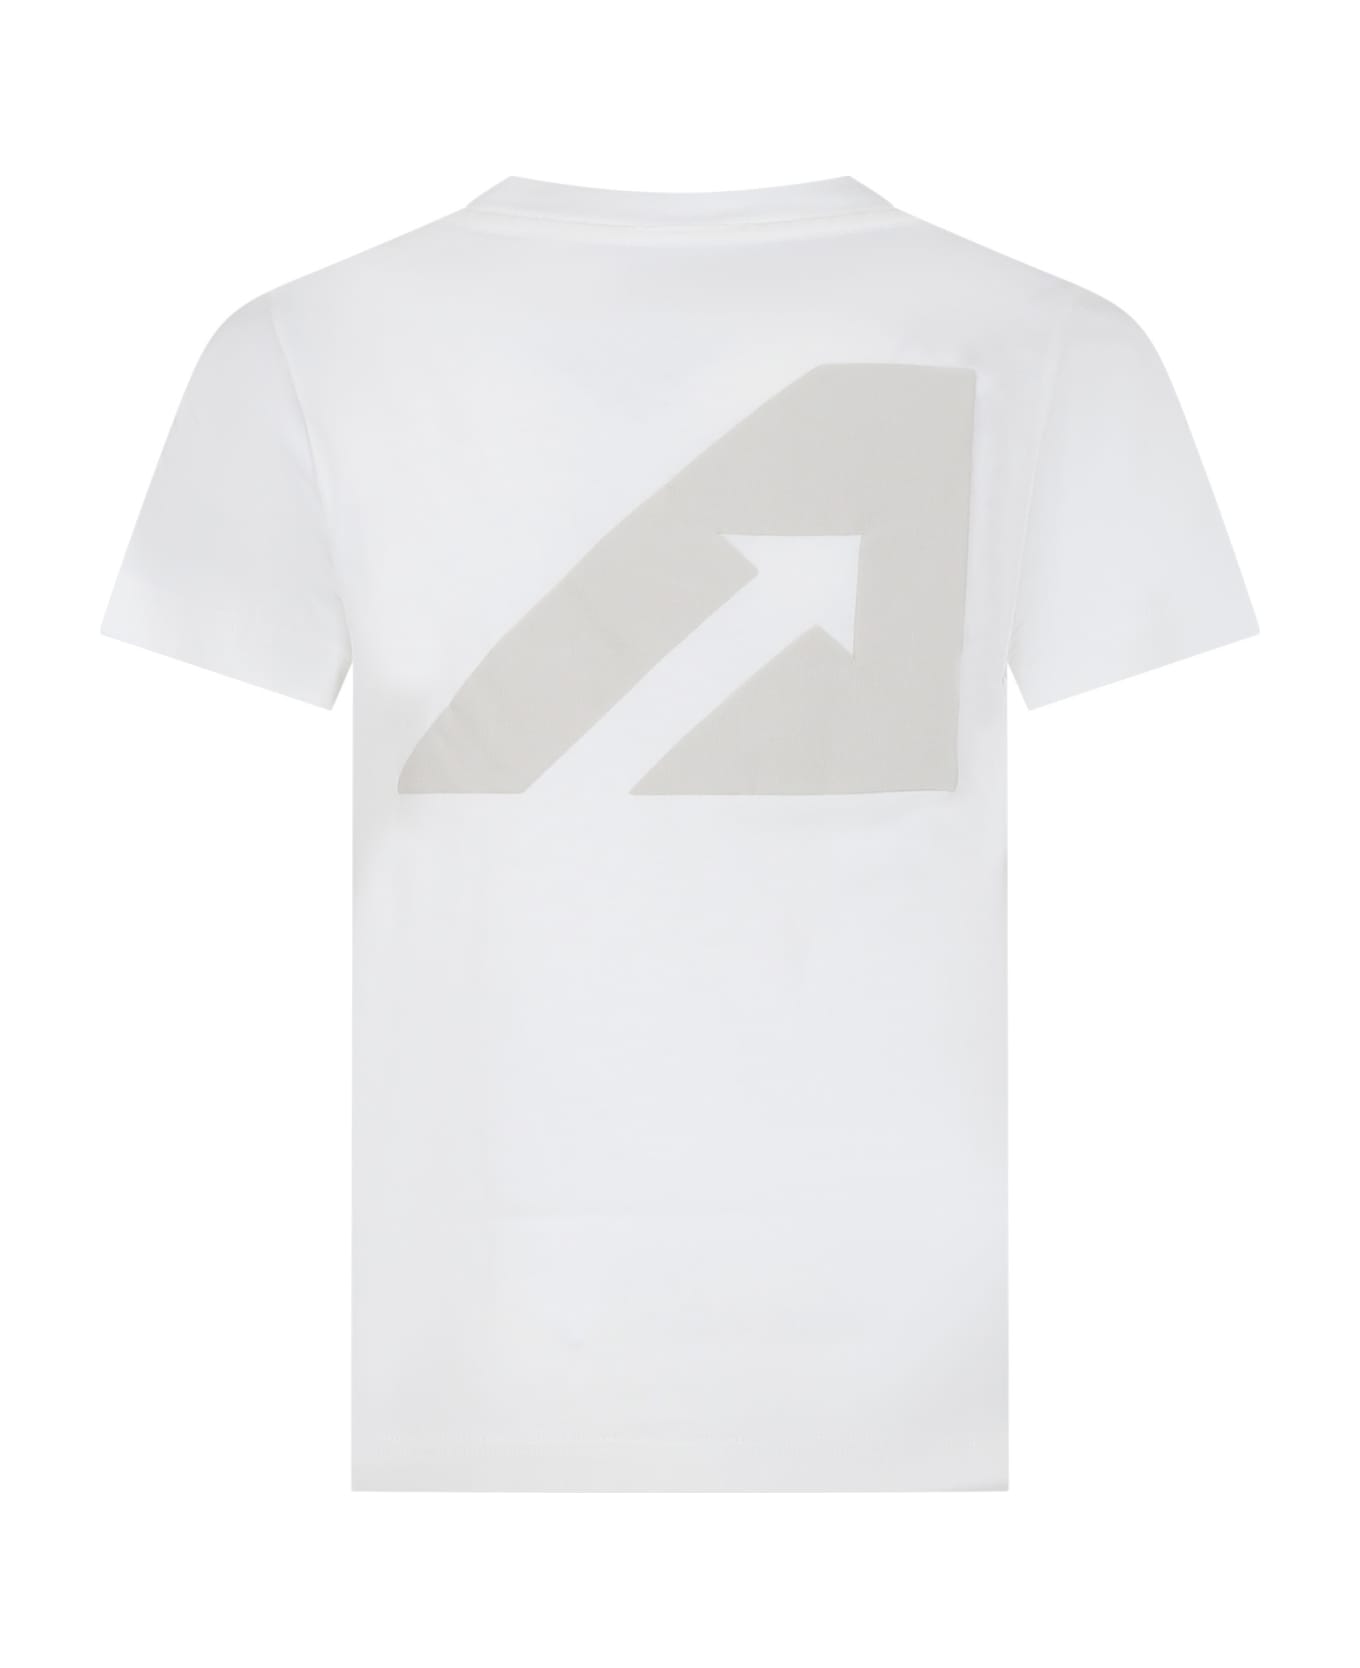 Autry White T-shirt For Kids With Logo - Bianco Tシャツ＆ポロシャツ